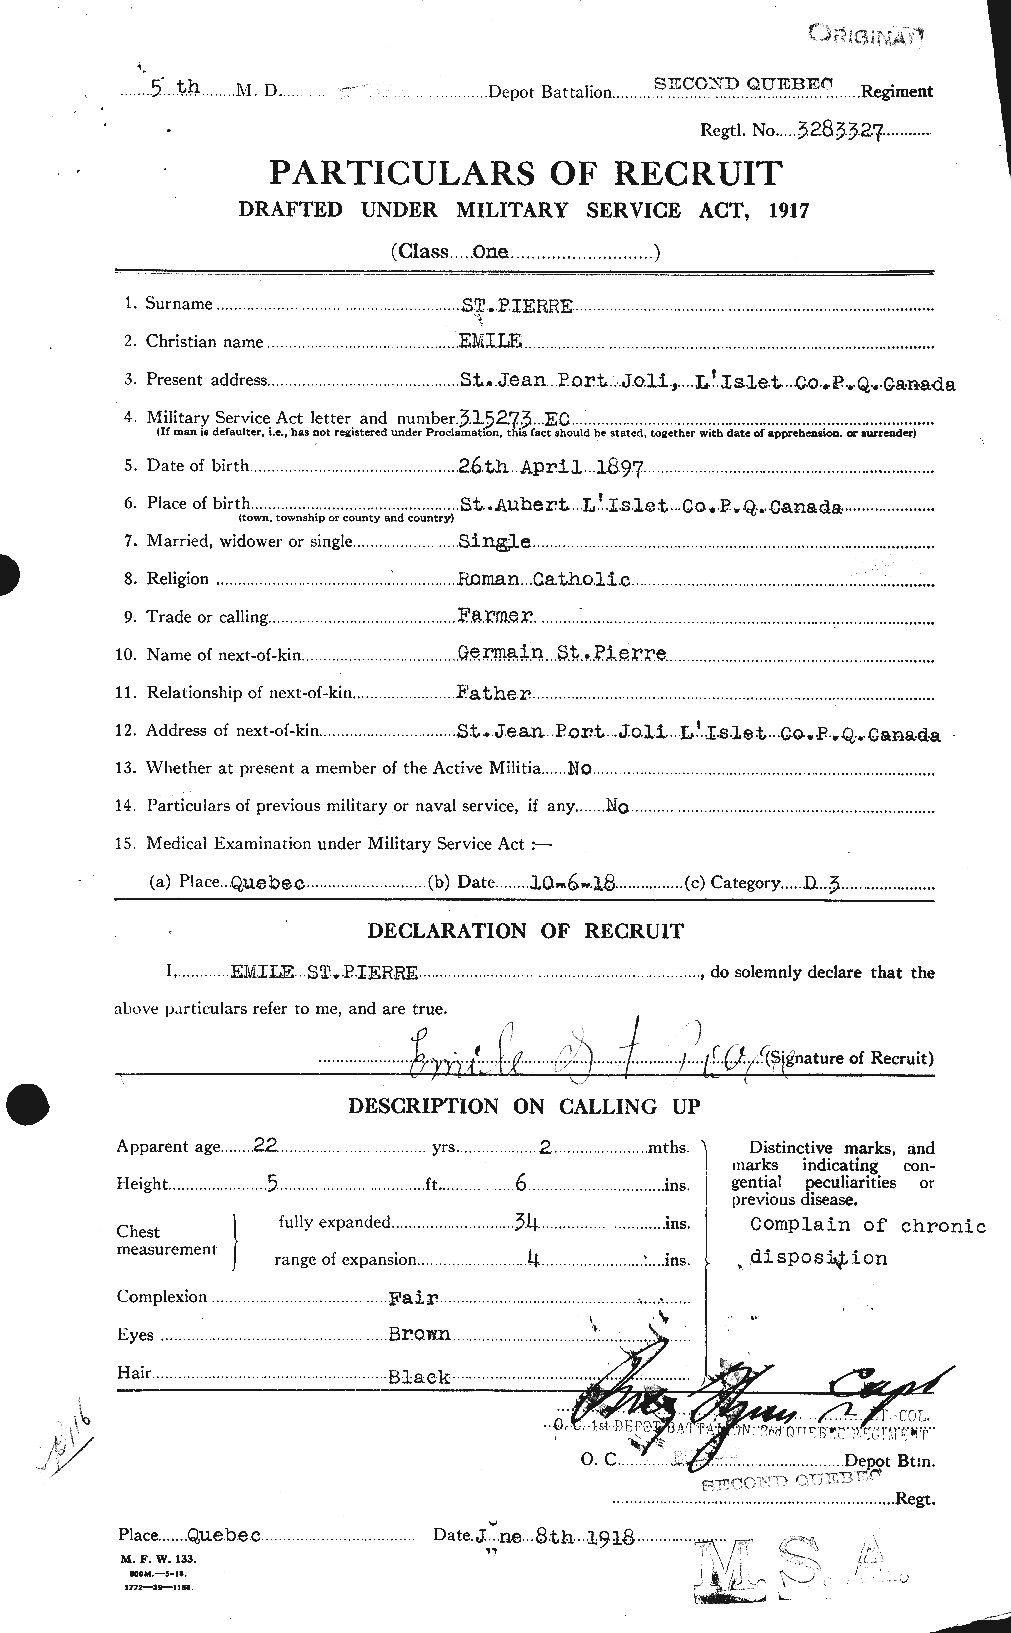 Personnel Records of the First World War - CEF 077828a